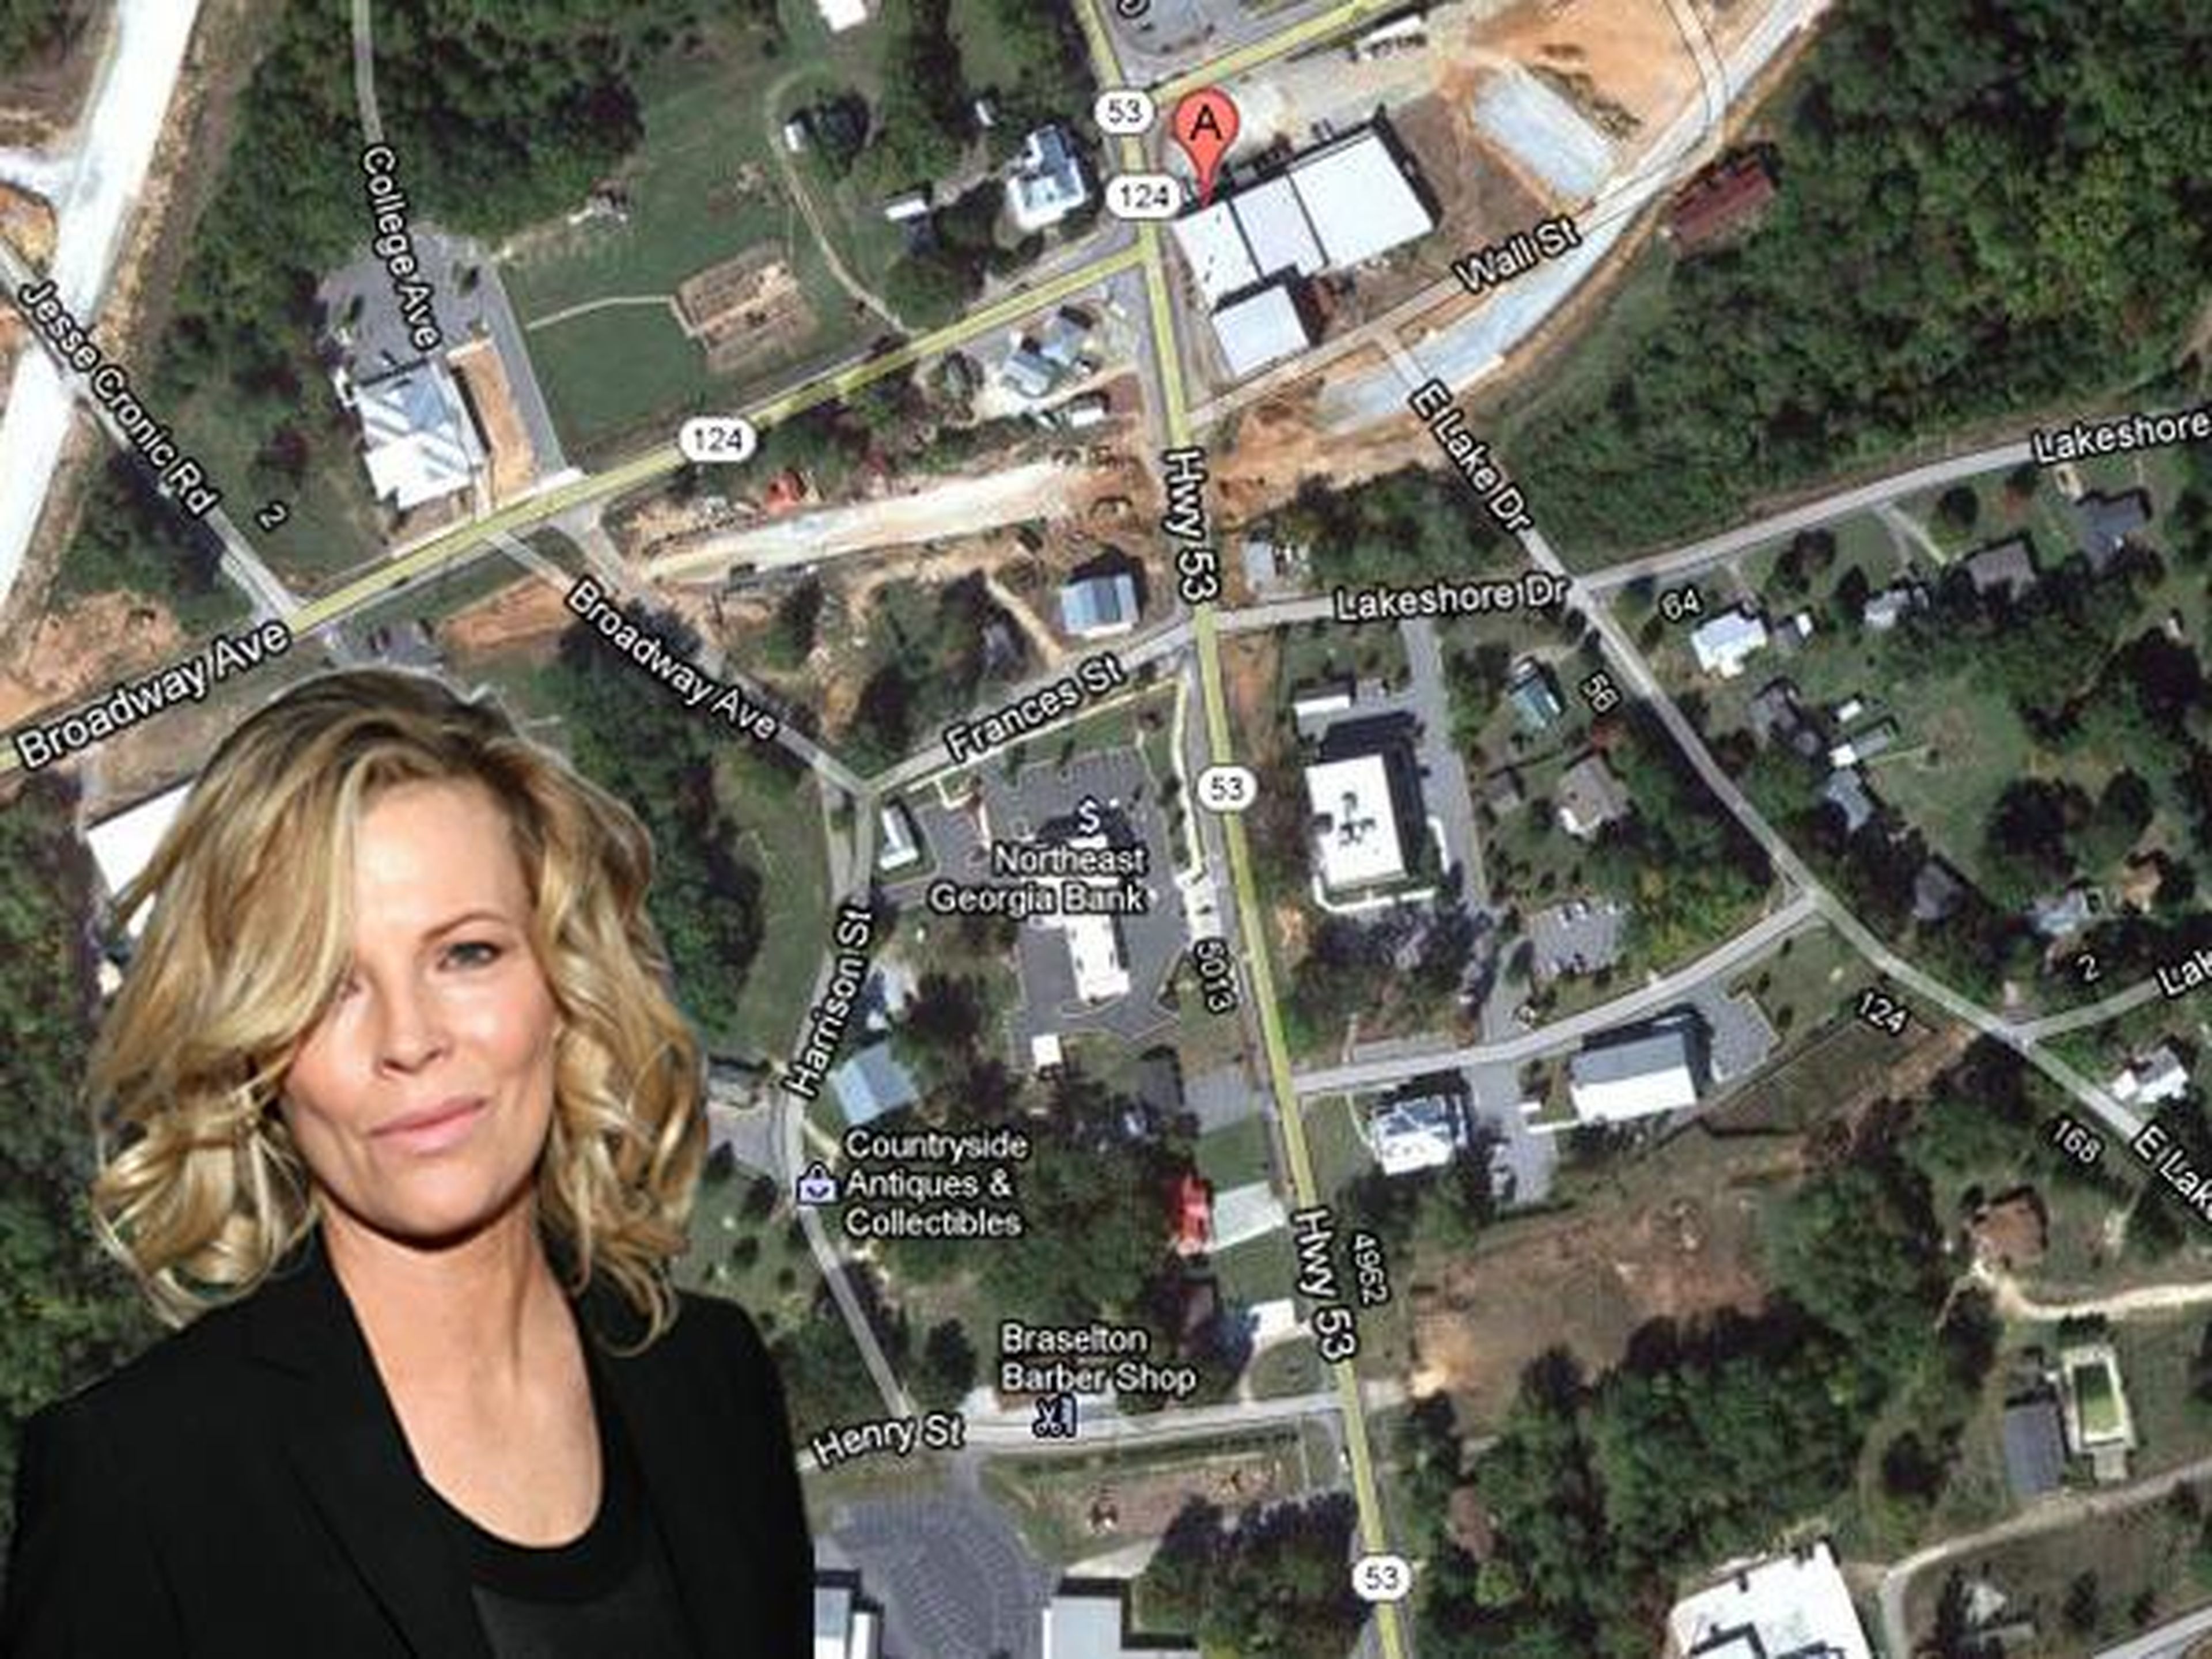 If an island isn't your thing, you can always buy a town, like Kim Basinger did in 1989. With other investors, she bought 1,751 acres of the 2,000-acre town of Braselton, Georgia, for $20 million. She wanted to turn the town's